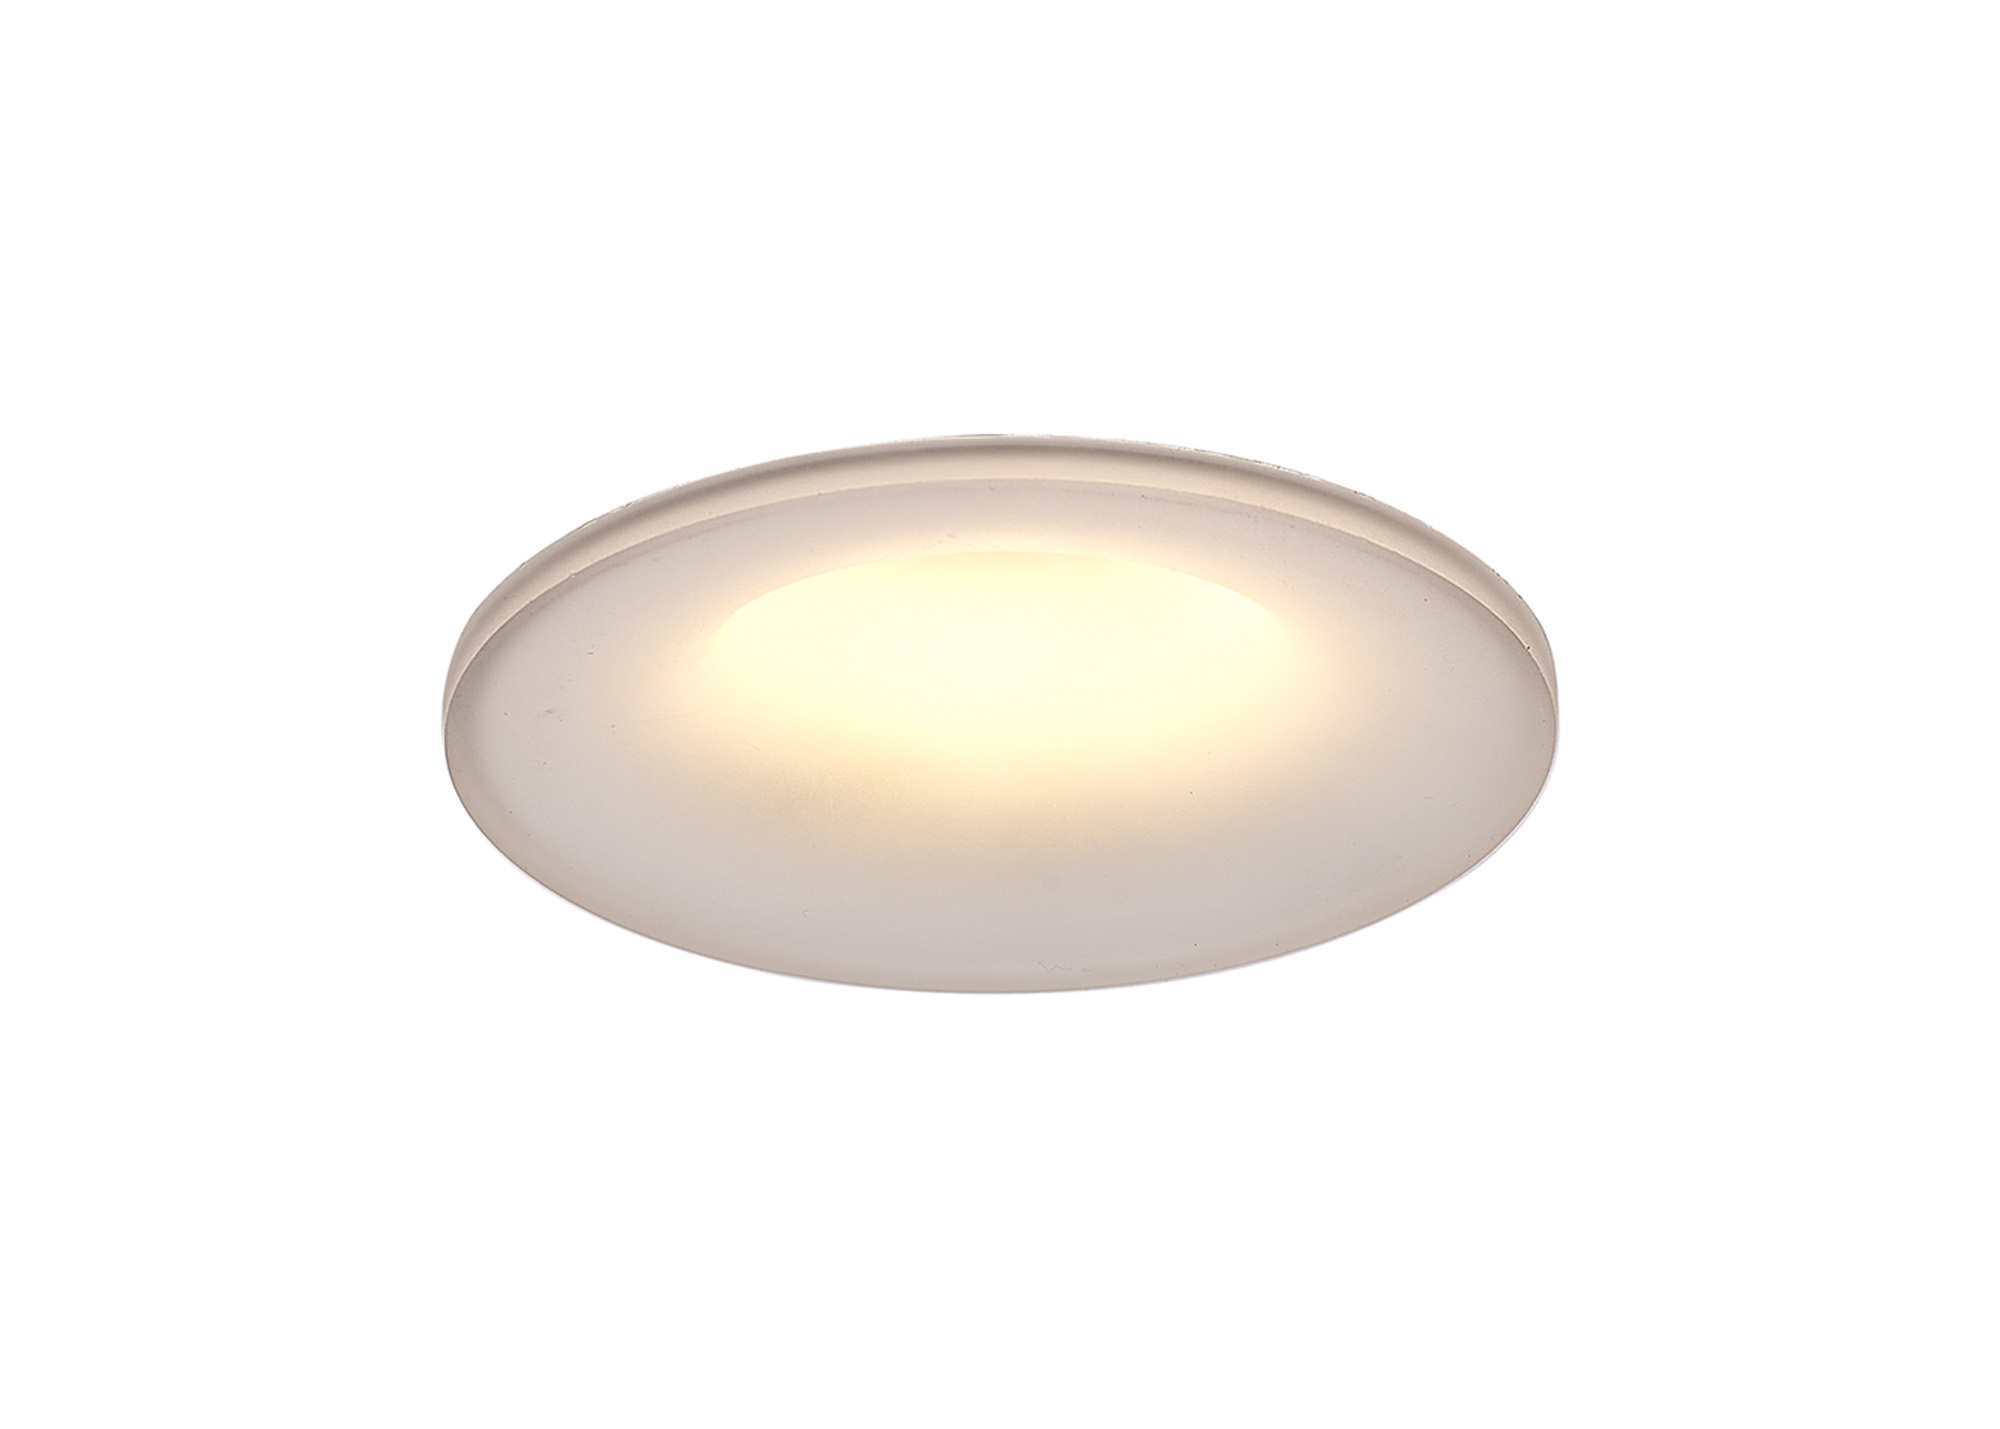 Lagos Ceiling Lights Mantra Fusion Recessed Lights